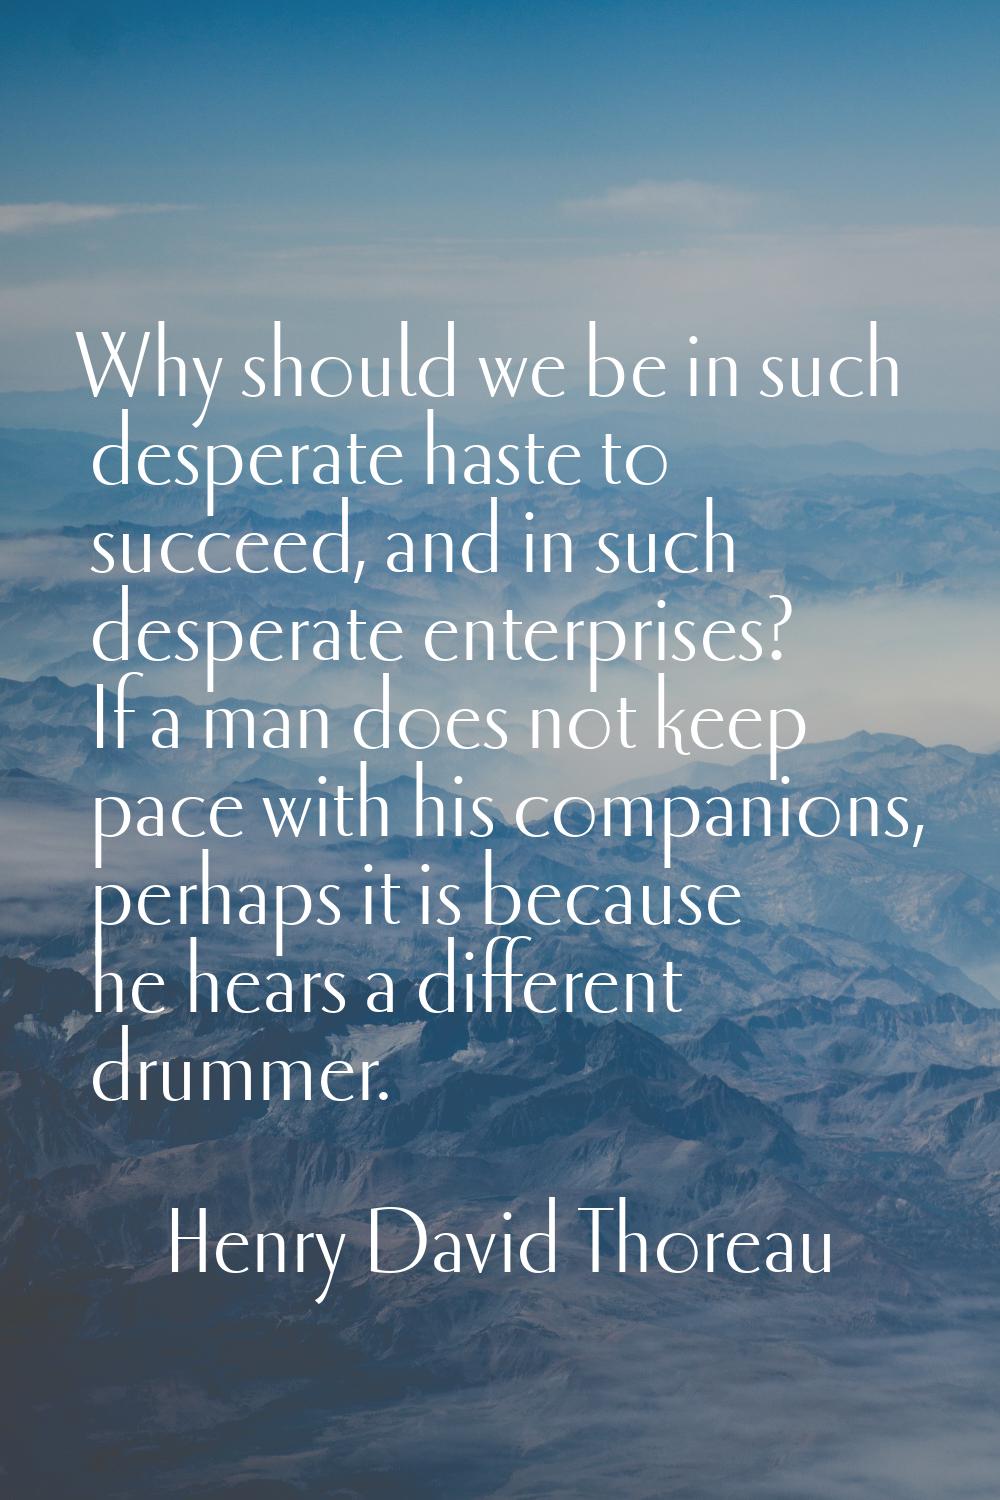 Why should we be in such desperate haste to succeed, and in such desperate enterprises? If a man do